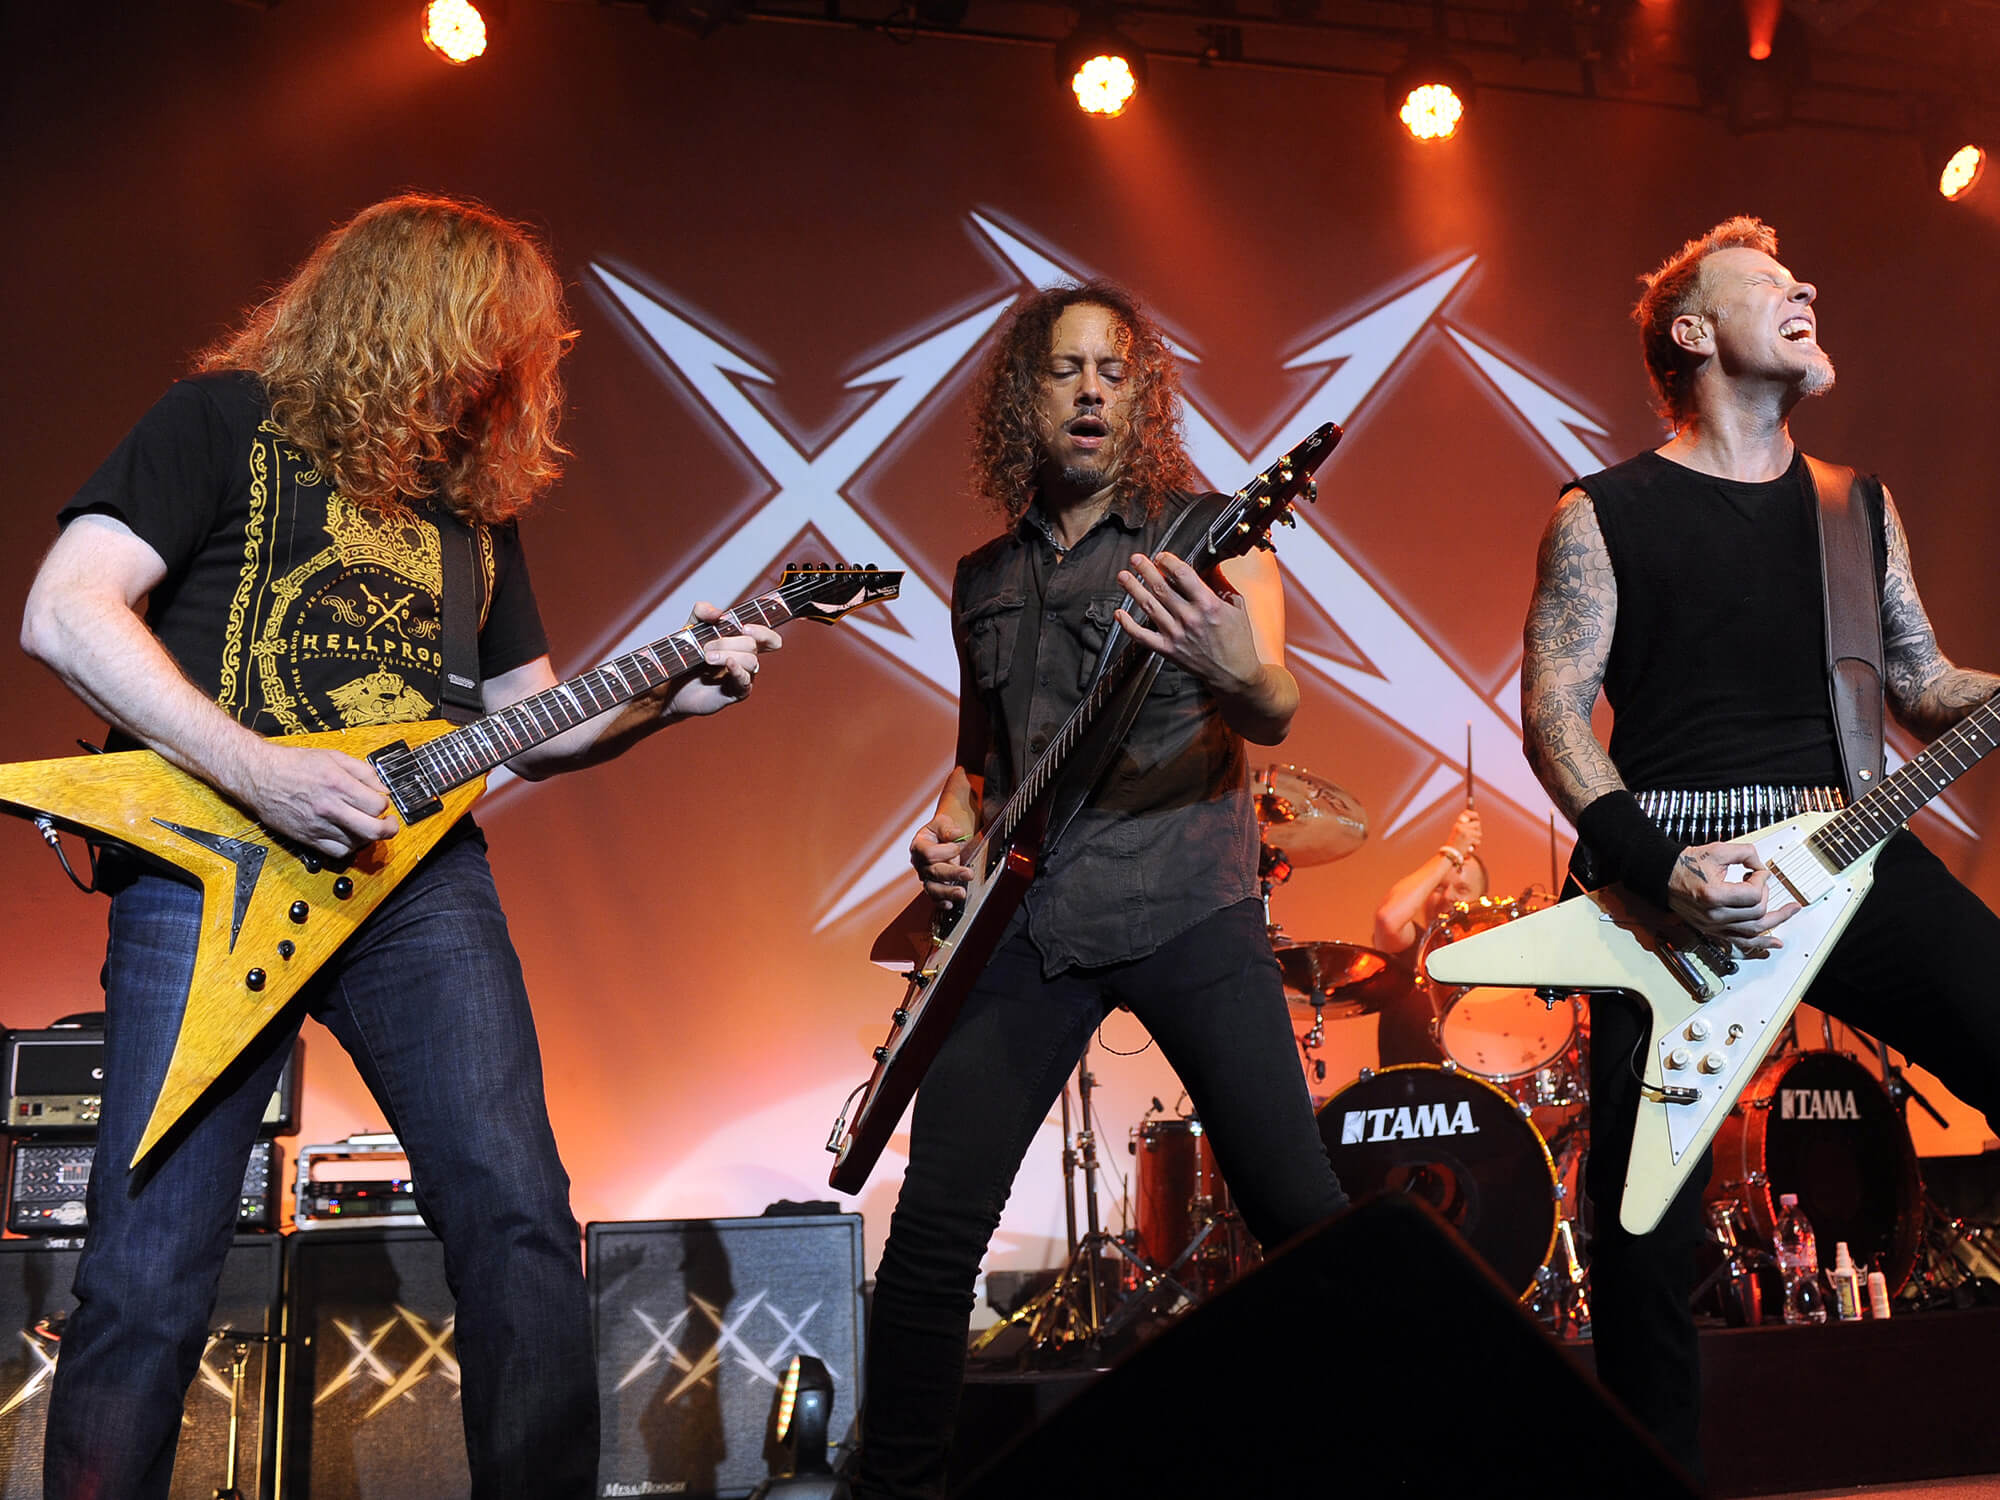 Dave Mustaine on stage with Kirk Hammett and James Hetfield of Metallica